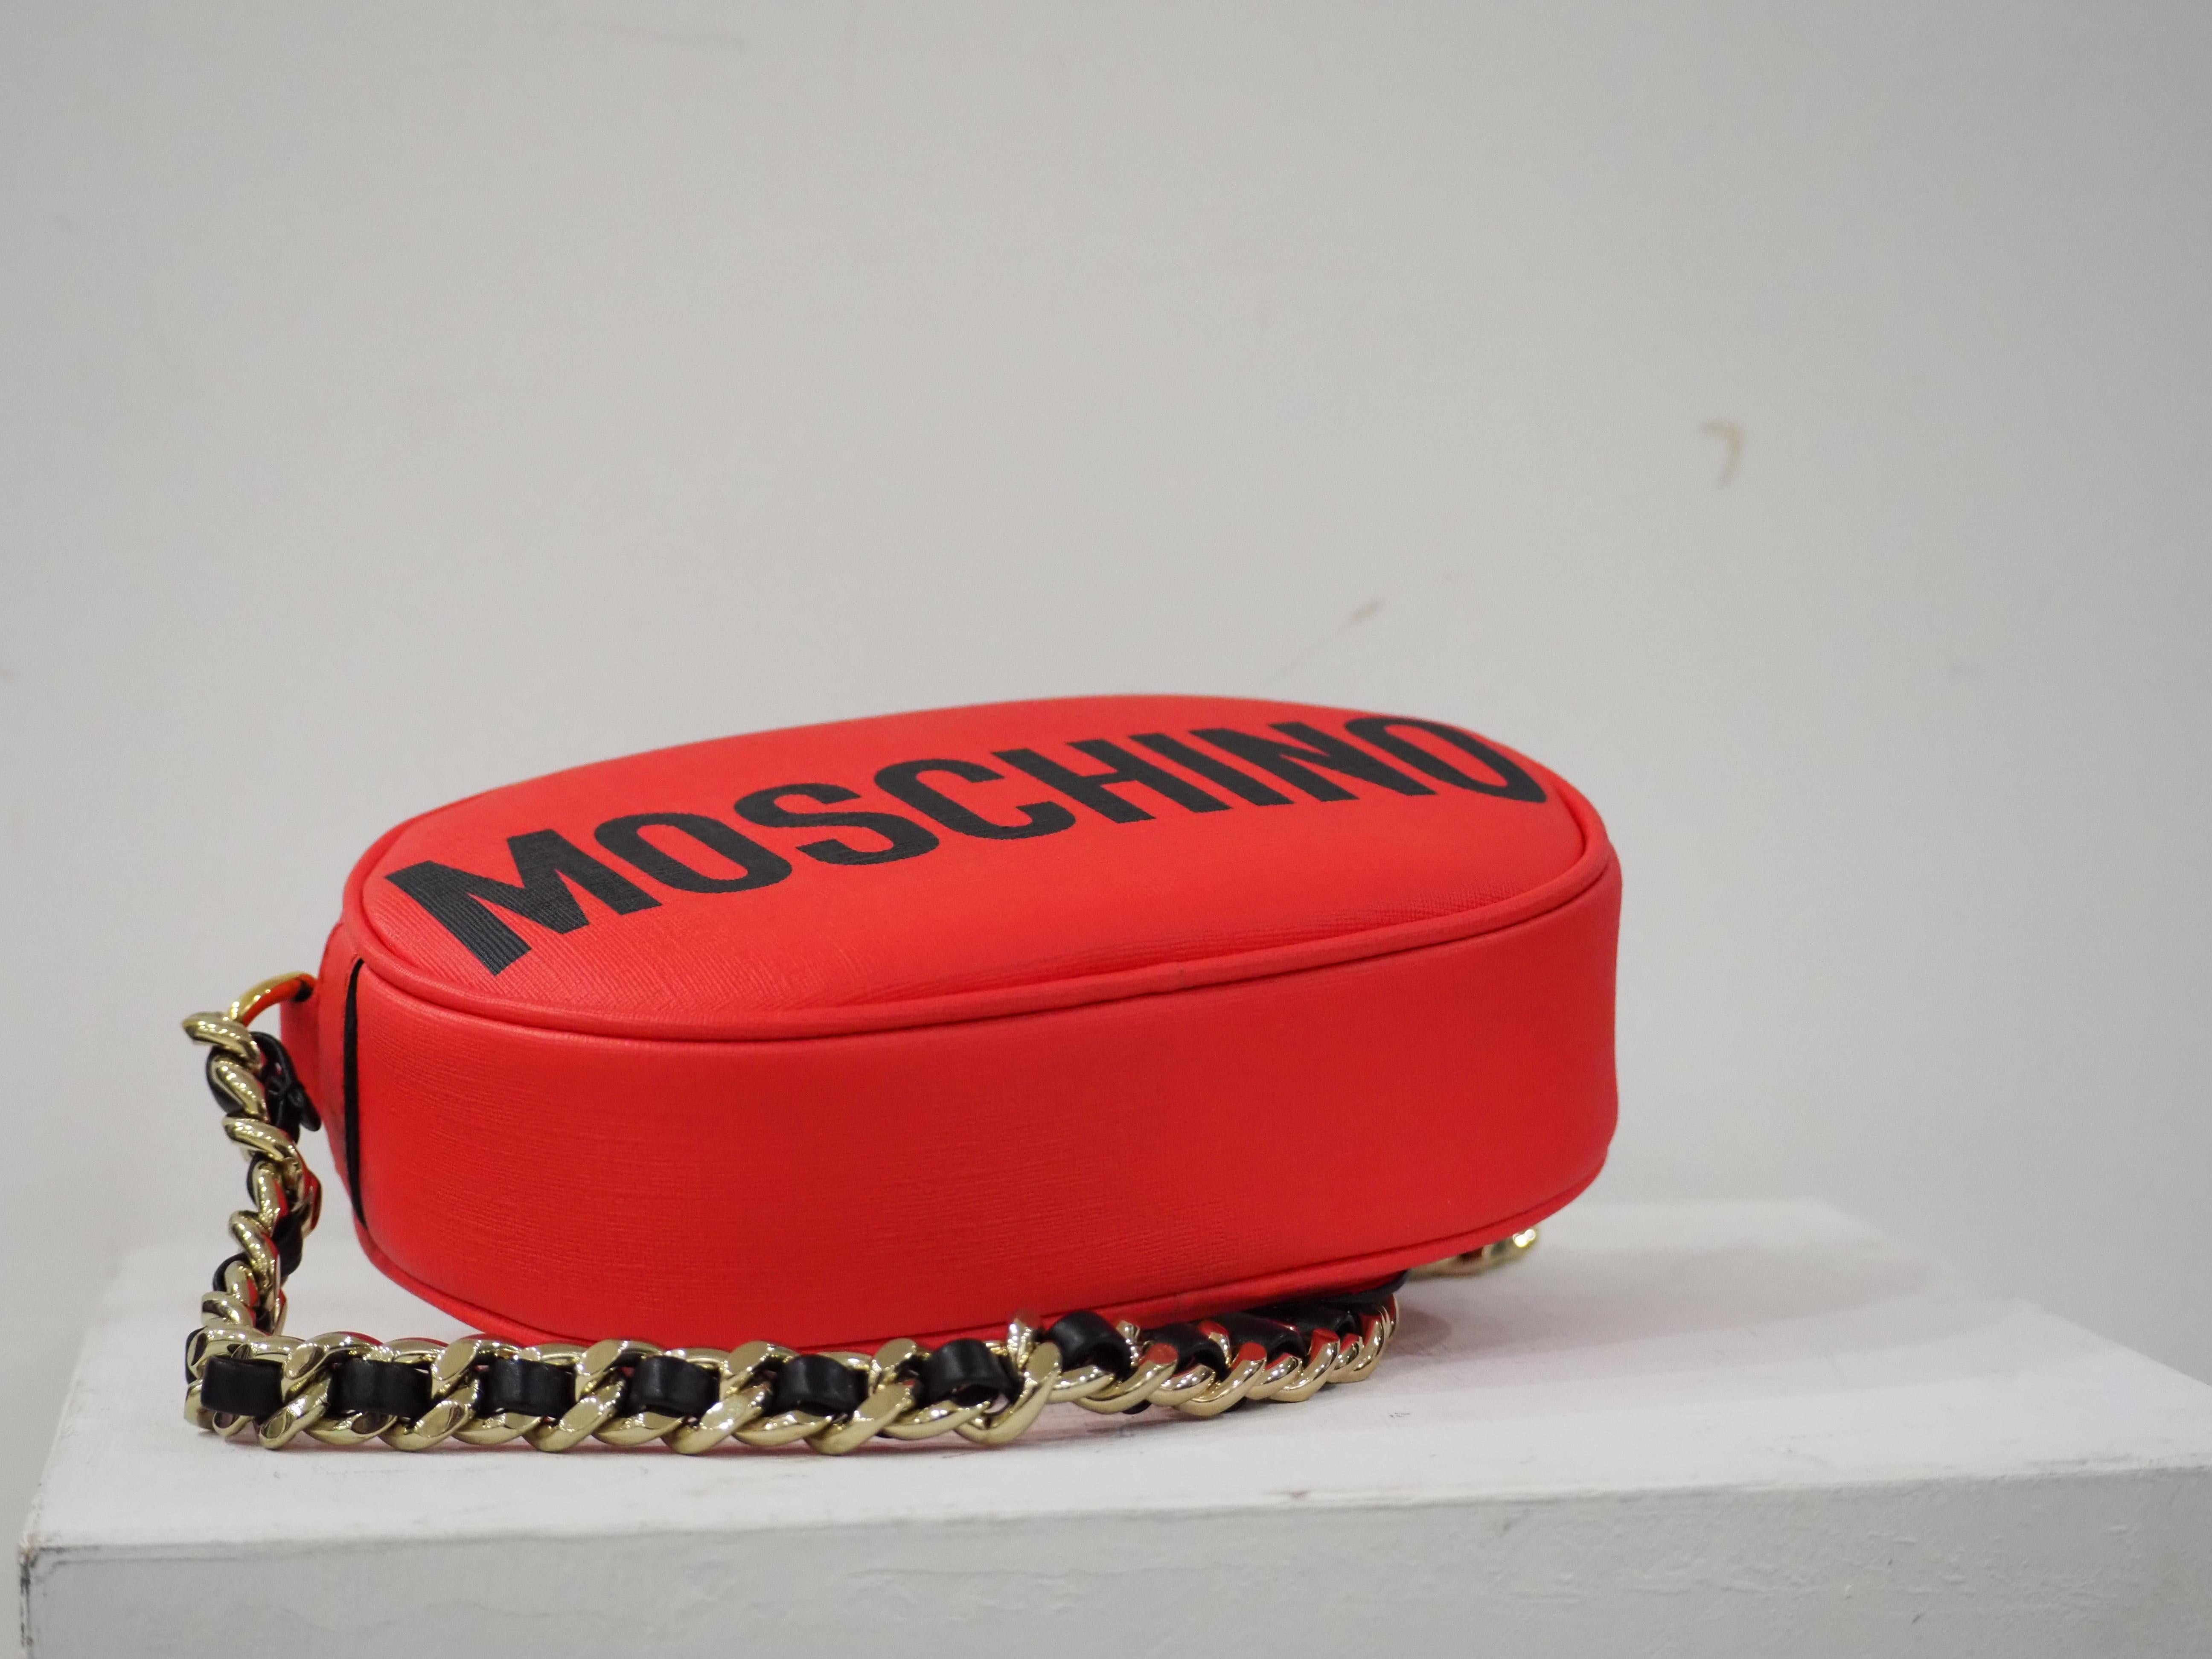 moschino this is not a toy bag